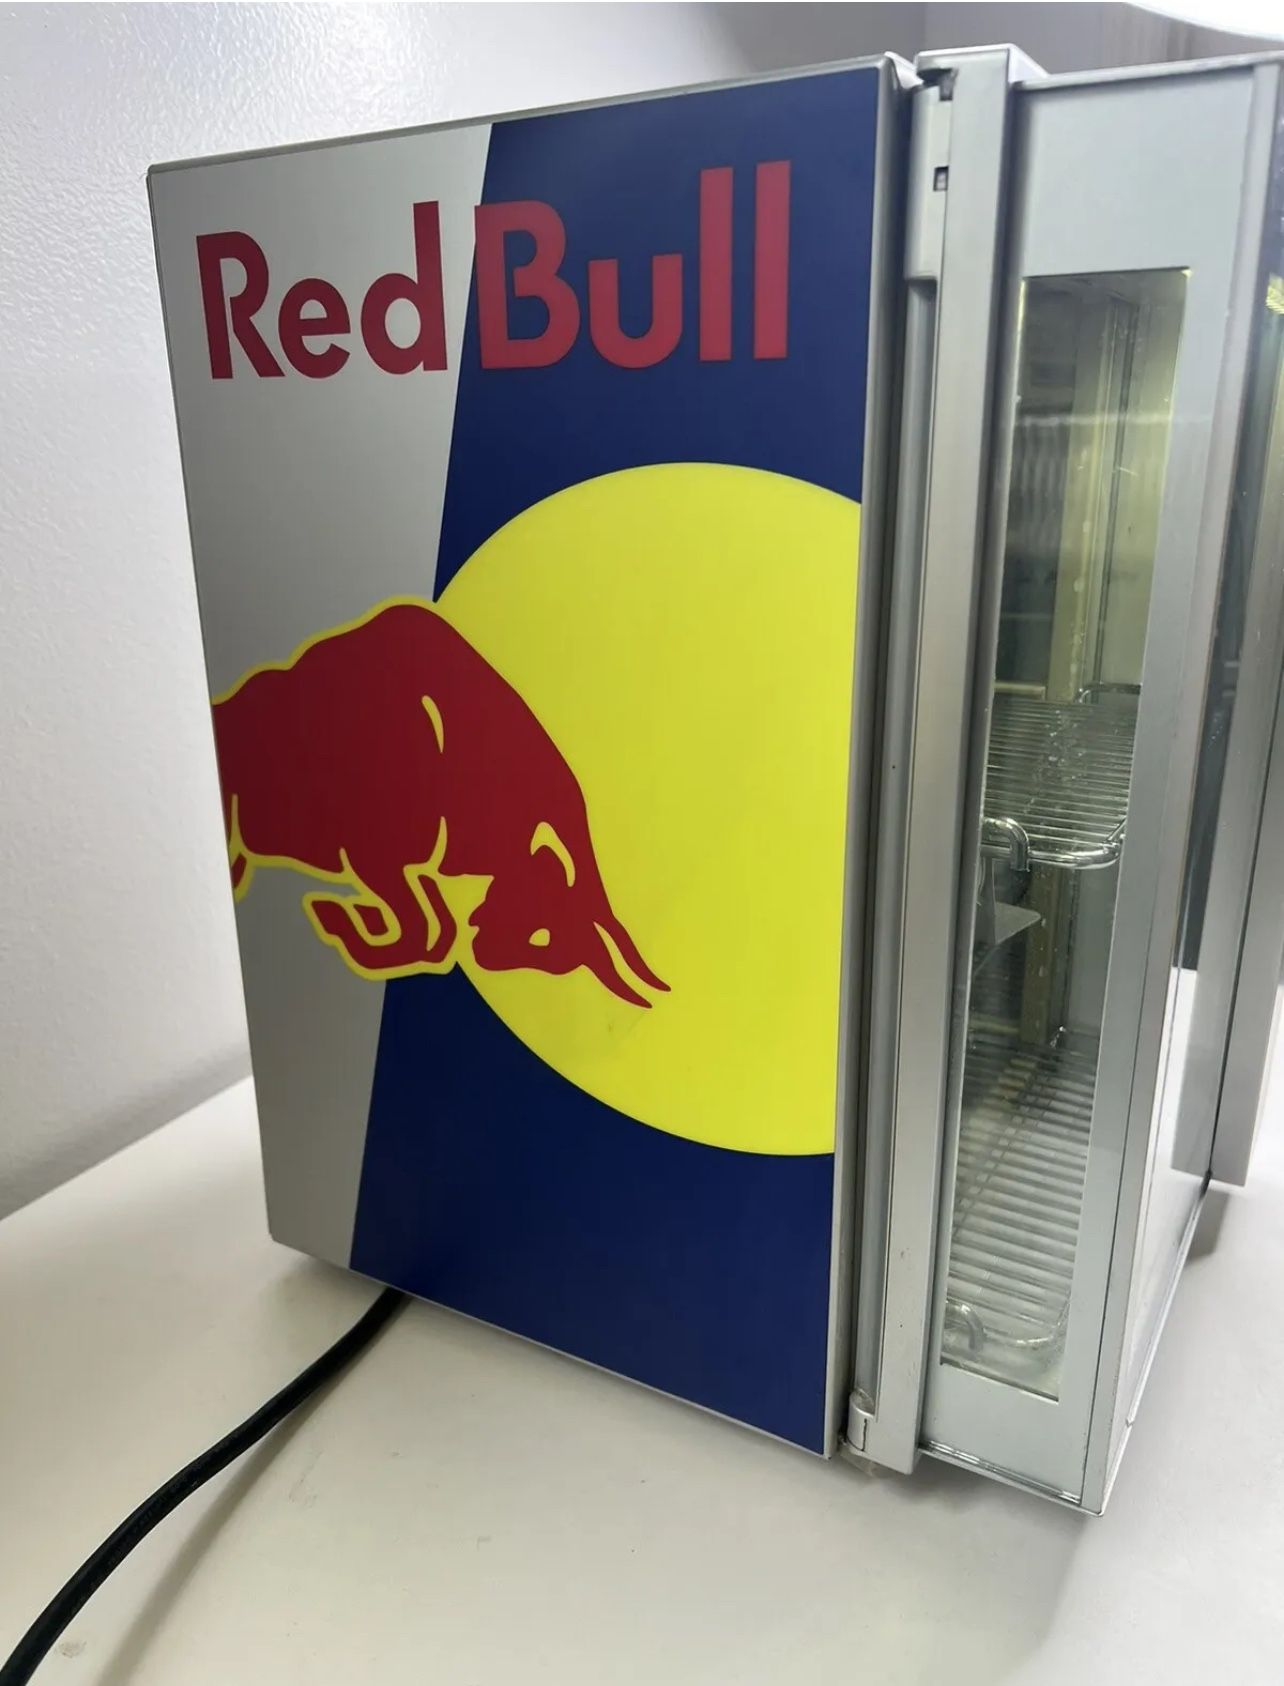 Red Bull Baby Cooler 2020 Eco Lef for Sale in Jersey City, NJ - OfferUp